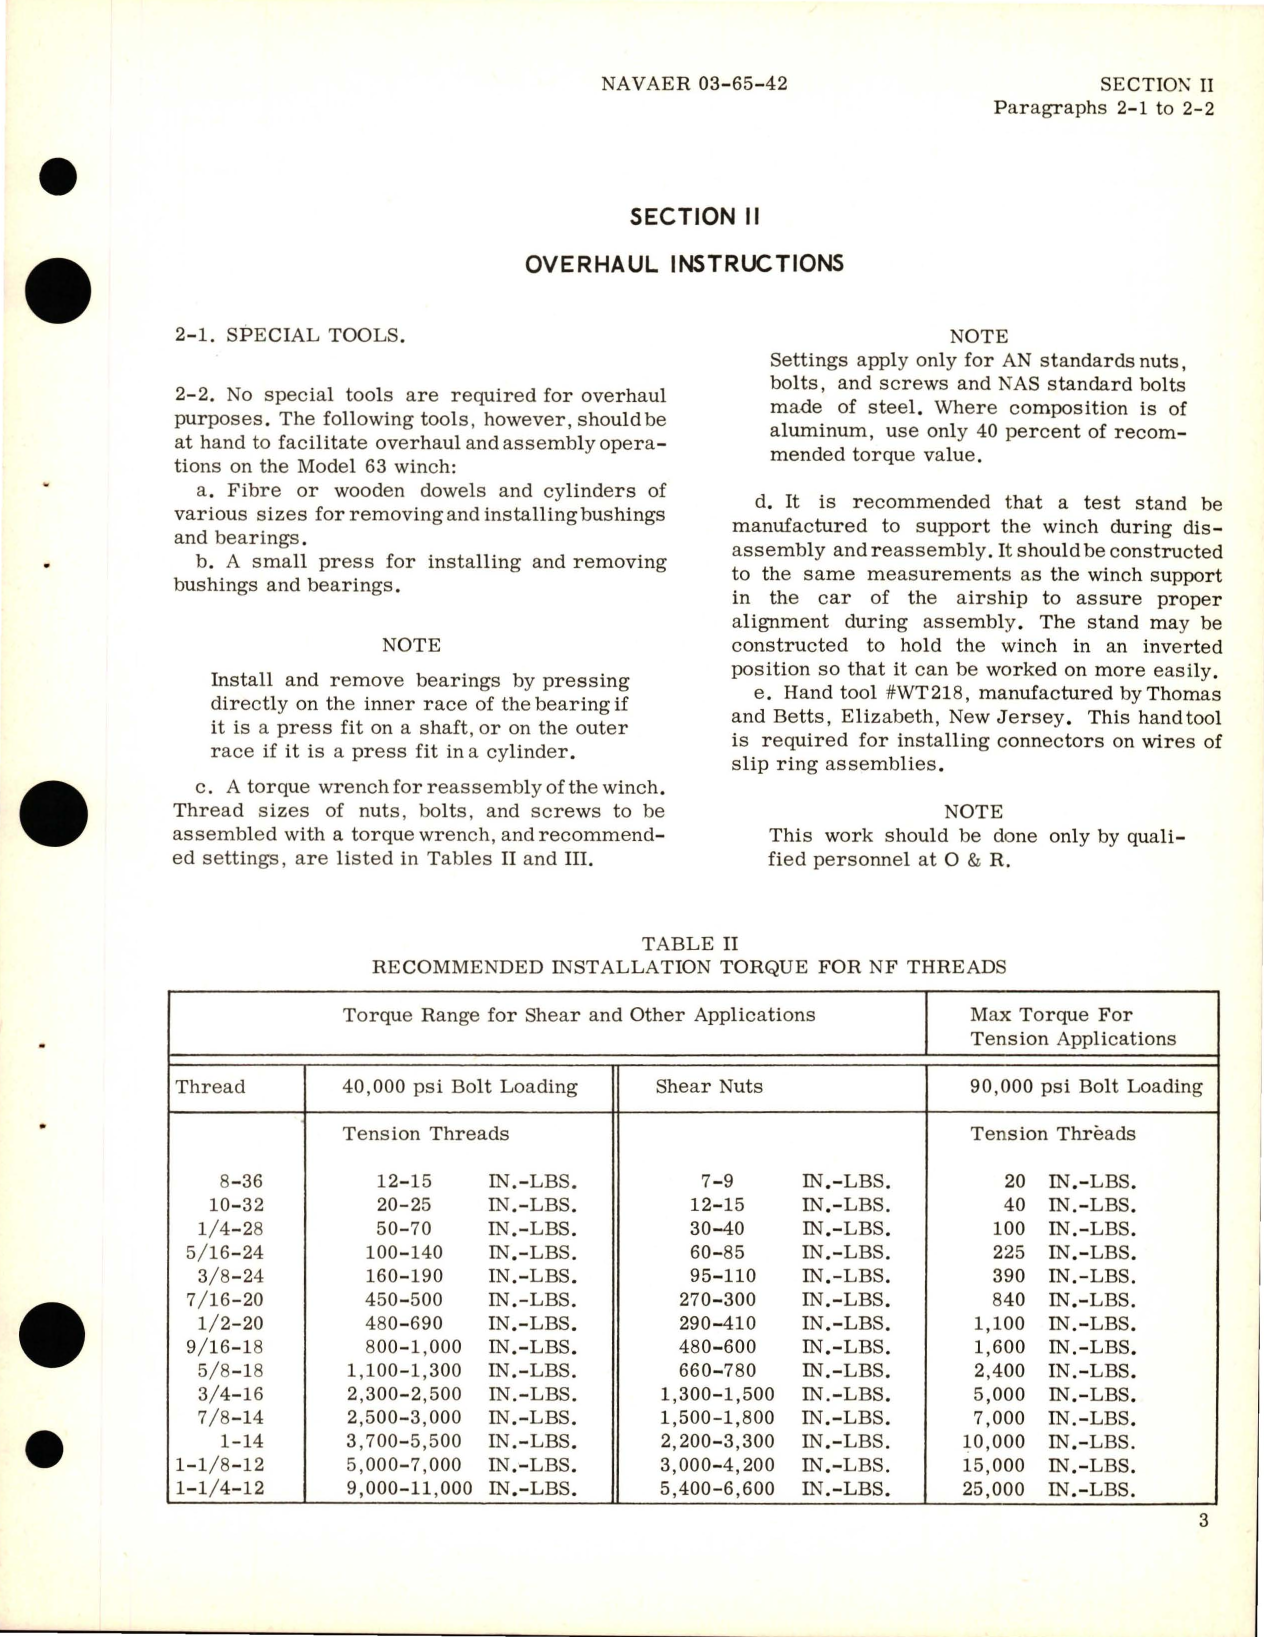 Sample page 7 from AirCorps Library document: Overhaul Instructions for All Purpose Winch - Model 63